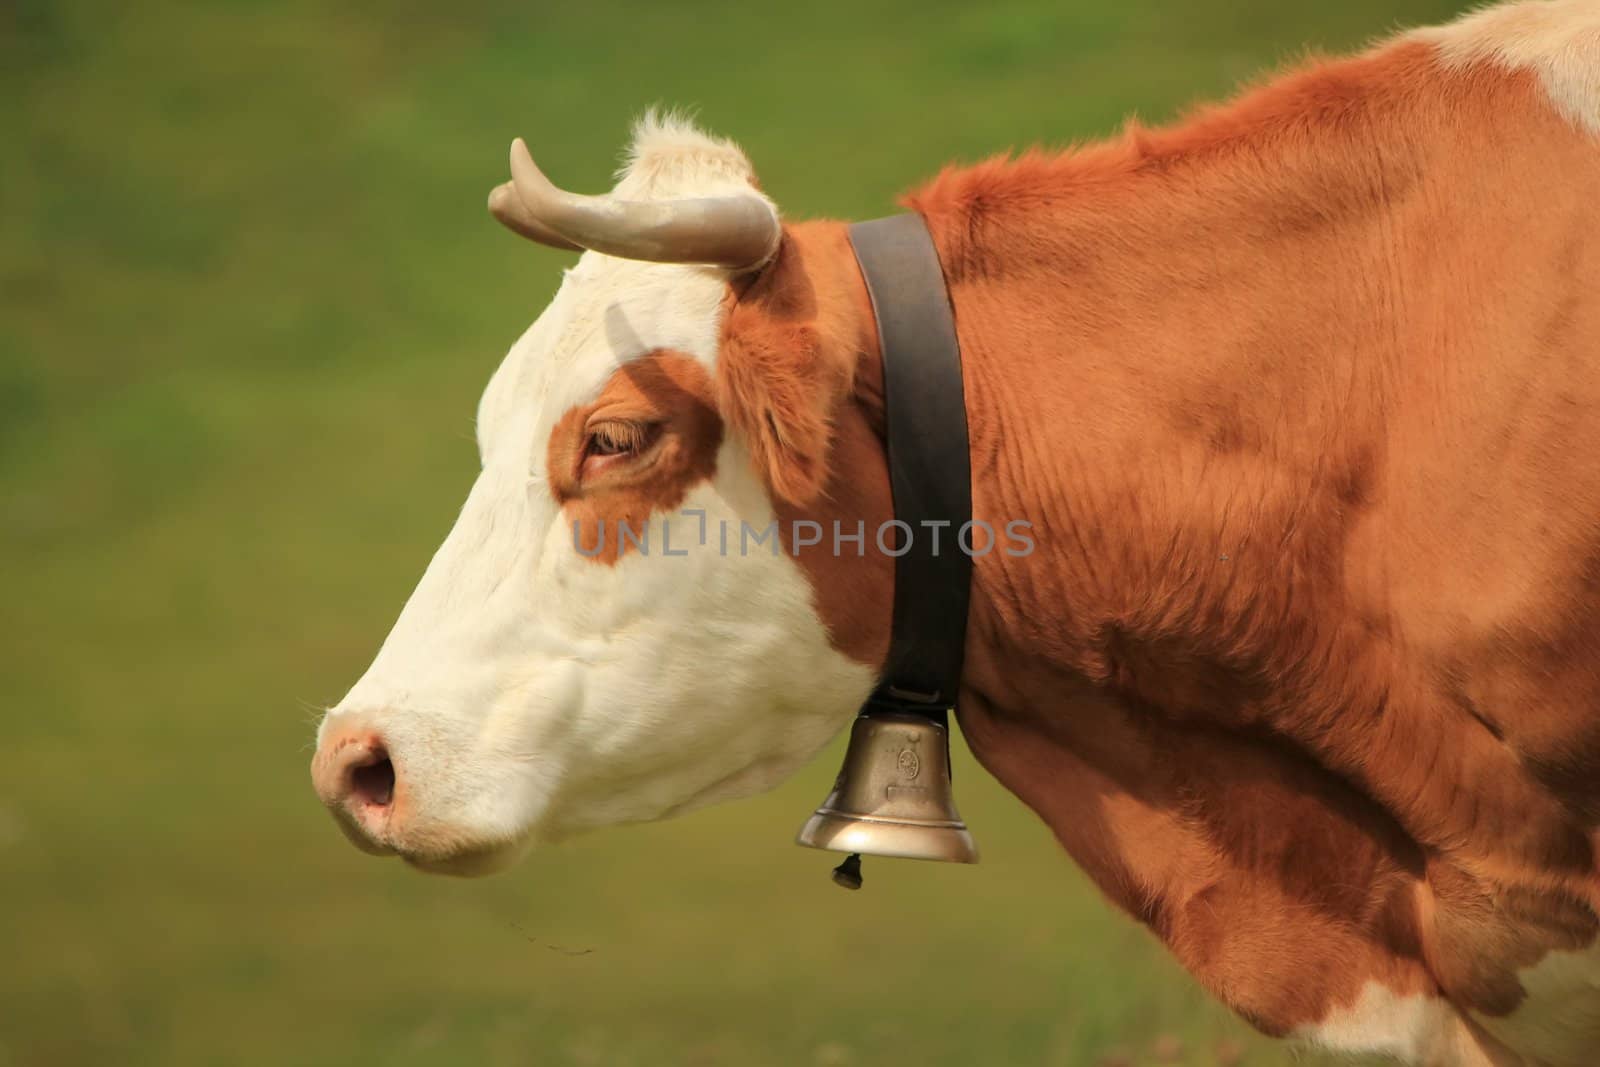 Beautiful profile portrait of a white and brown cow wearing a bell